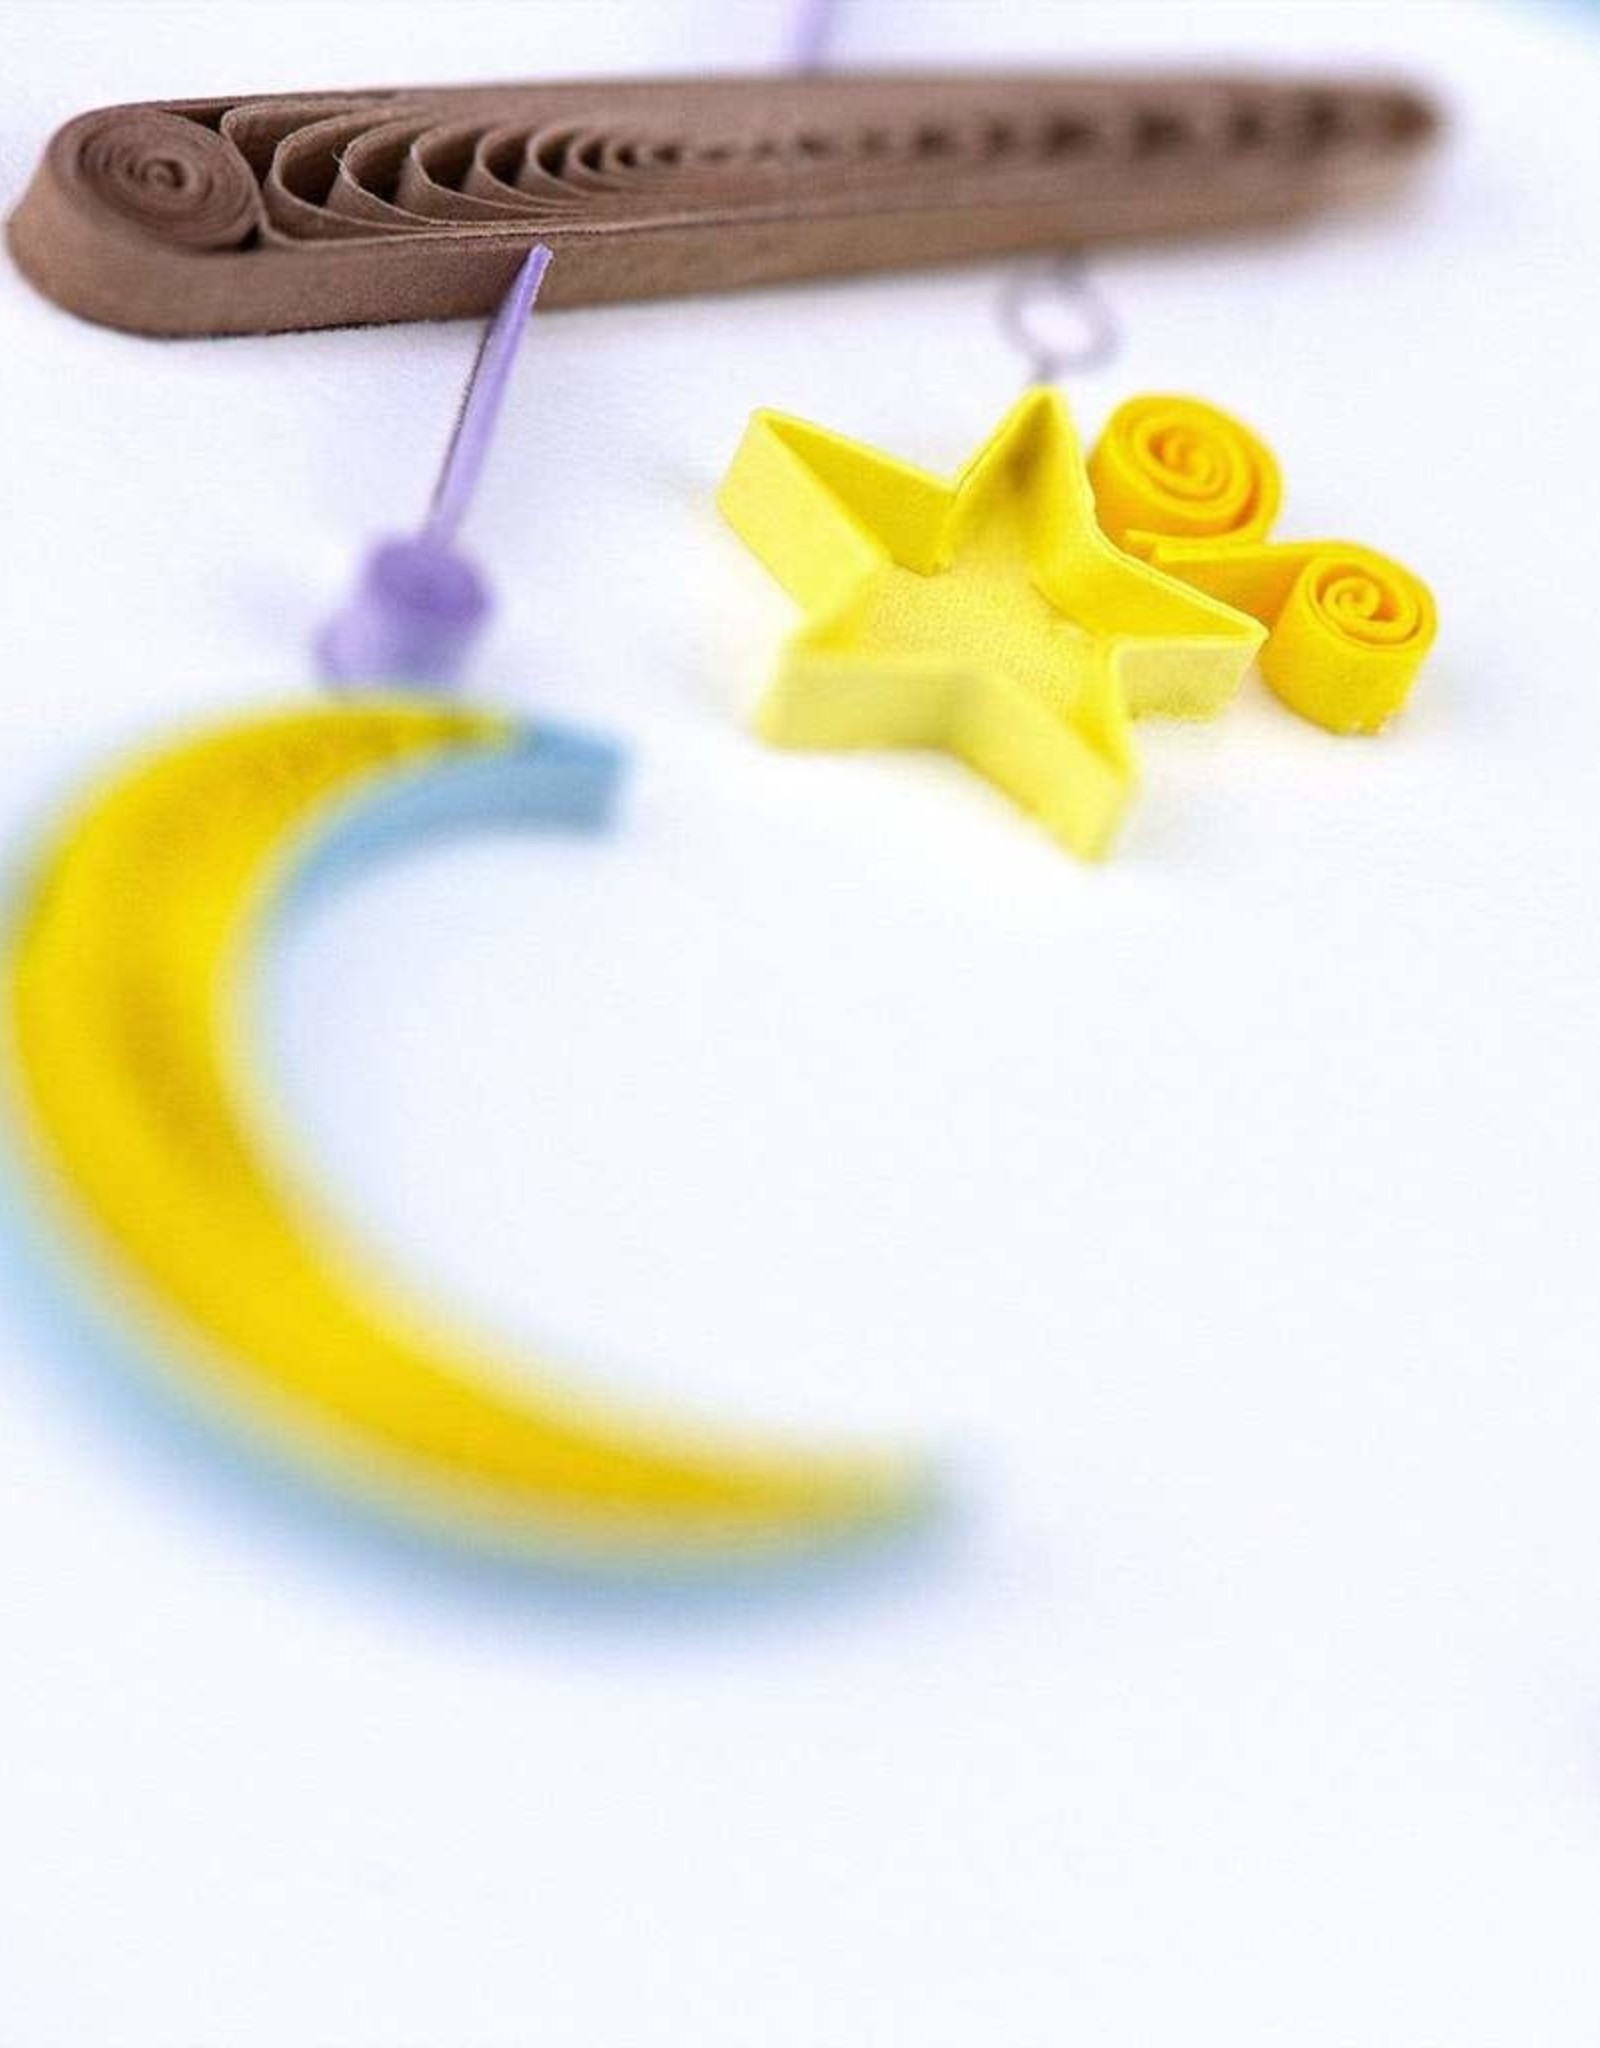 Quilling Card Quilled Night Sky Baby Mobile Card